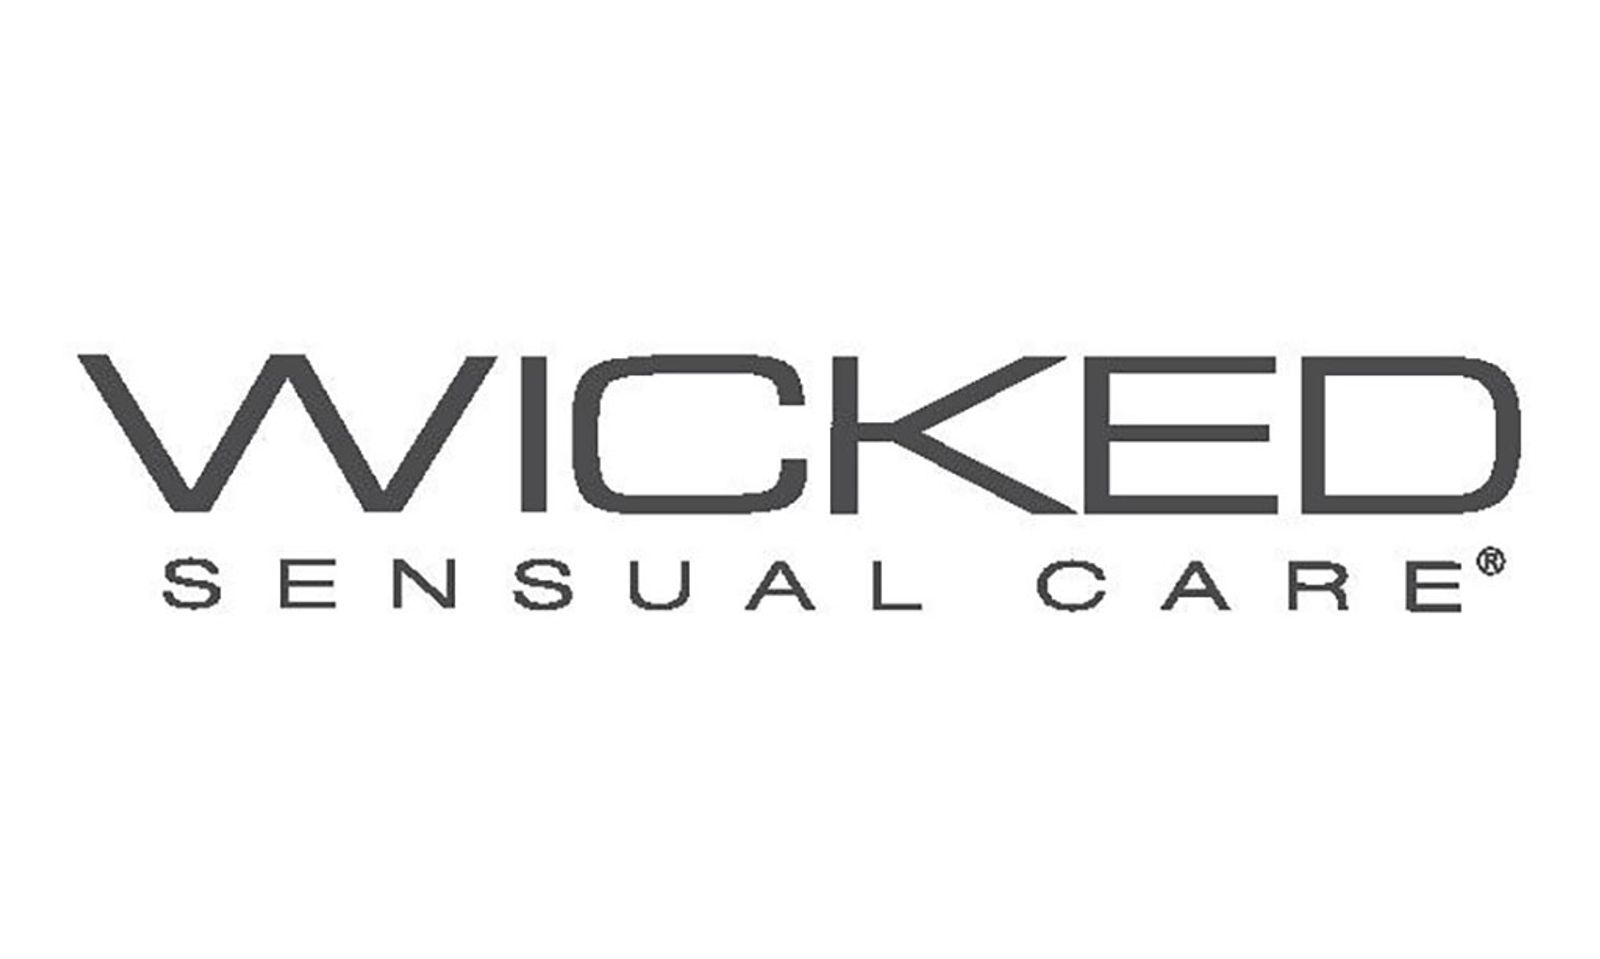 Wicked Sensual Care Nommed Best Lubricant Co. for 2020 AVN Awards